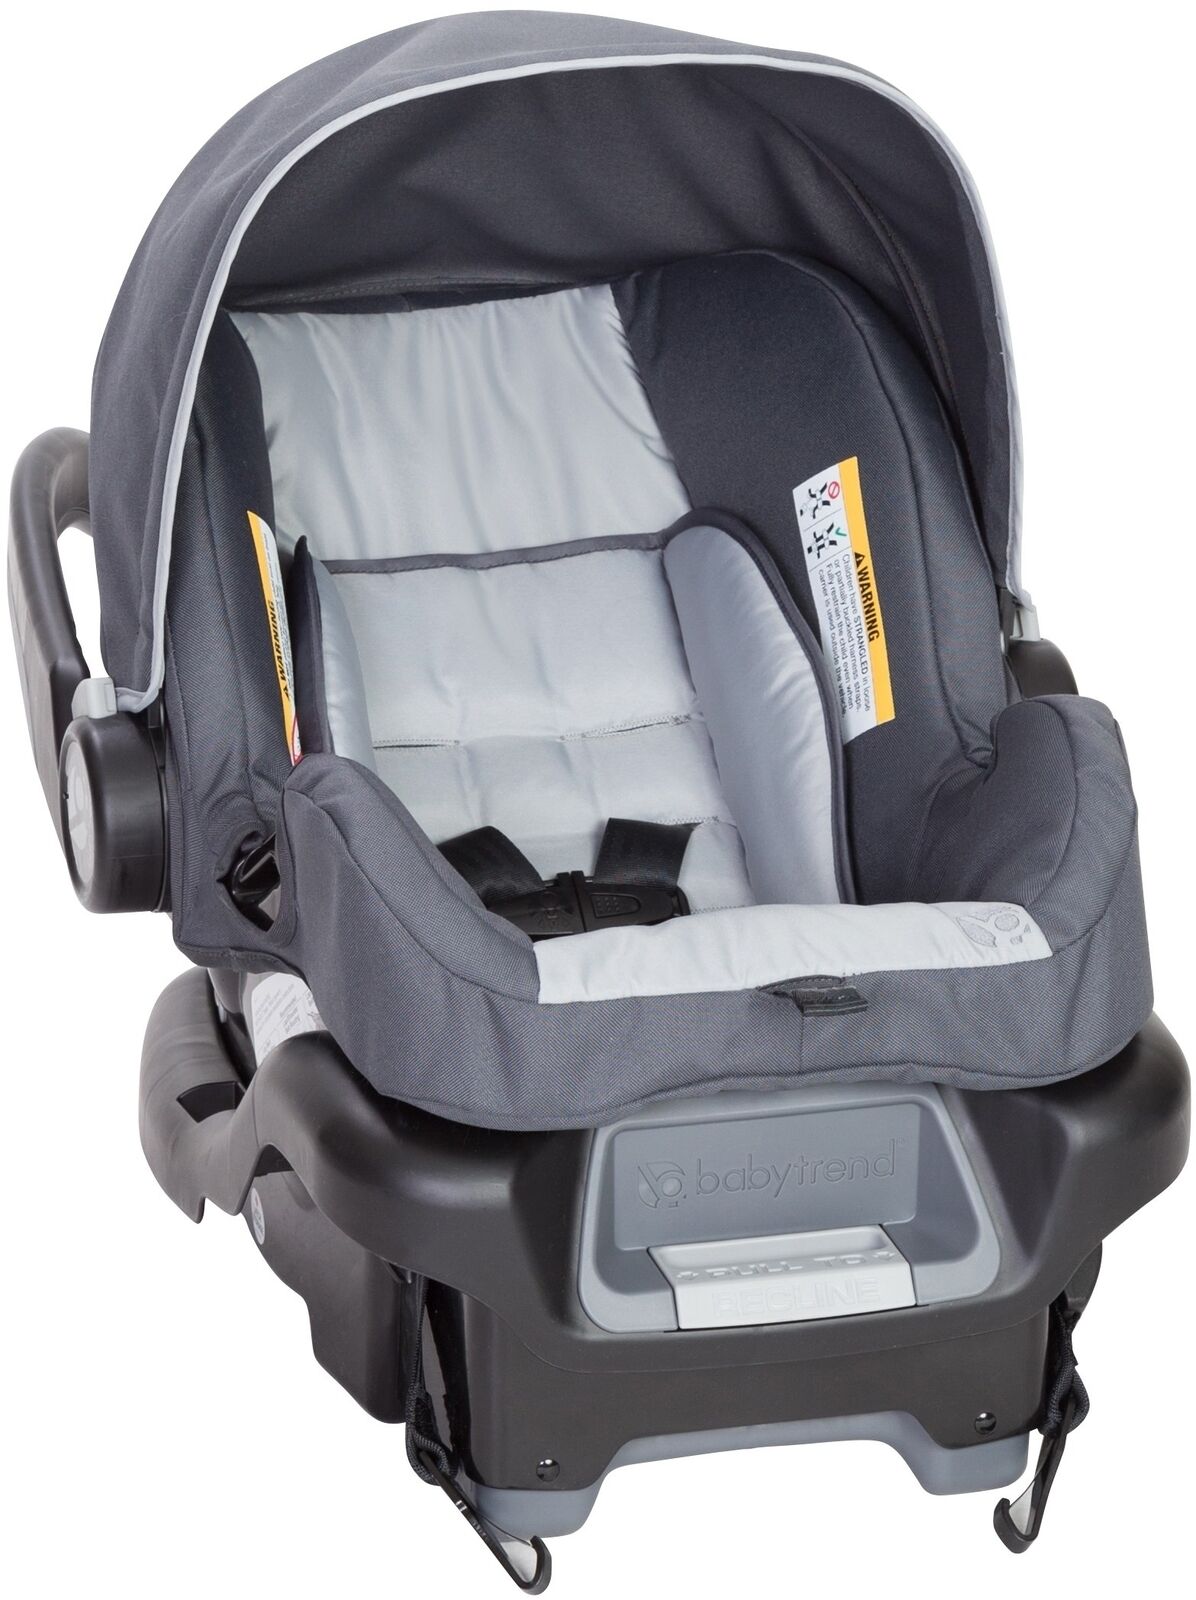 Infant Car Seat Baby Safety Seats Lightweight Height Adjustable 5pt Harness Gray